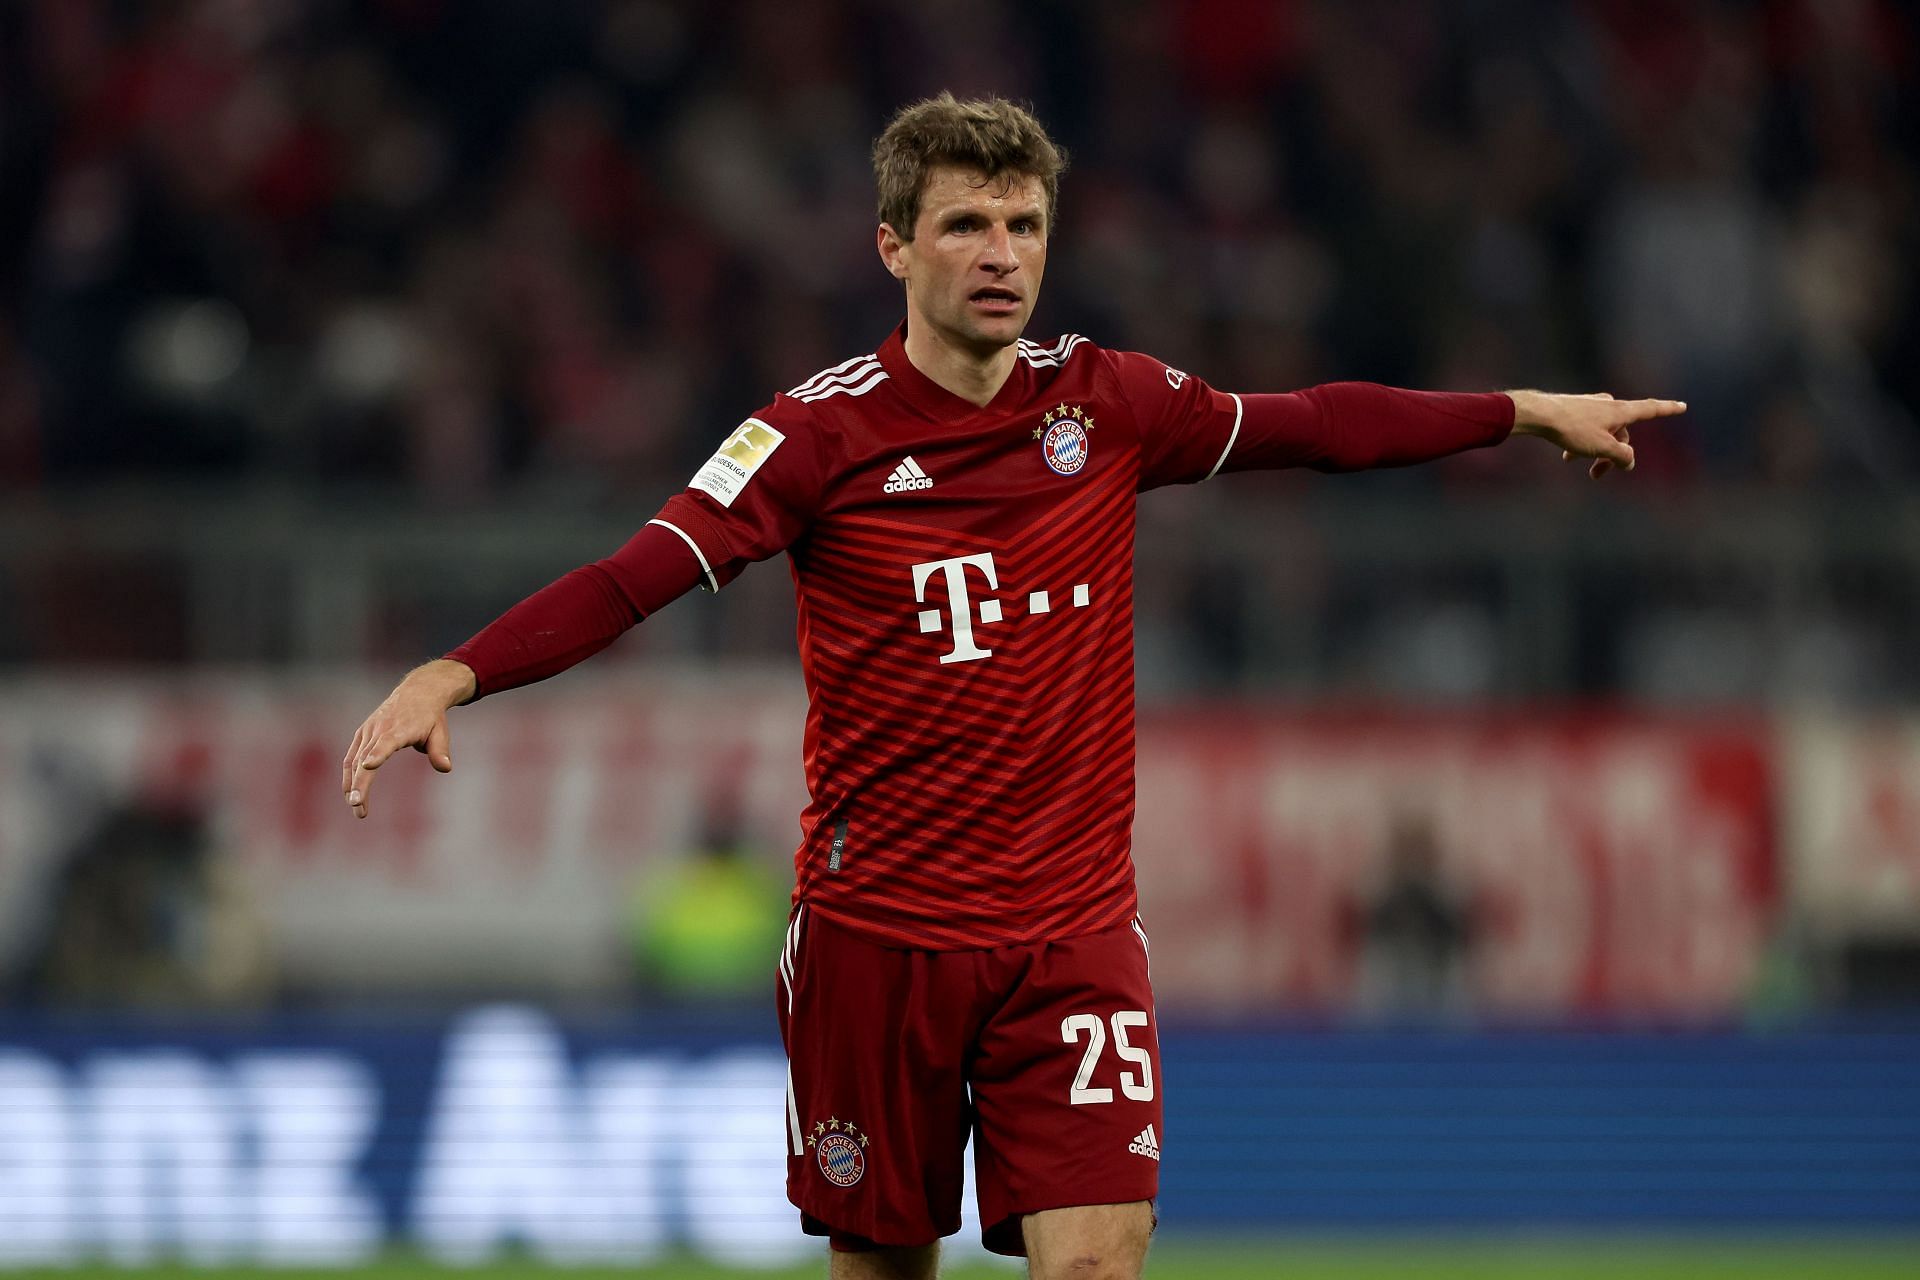 Muller has been among the best German players for many years